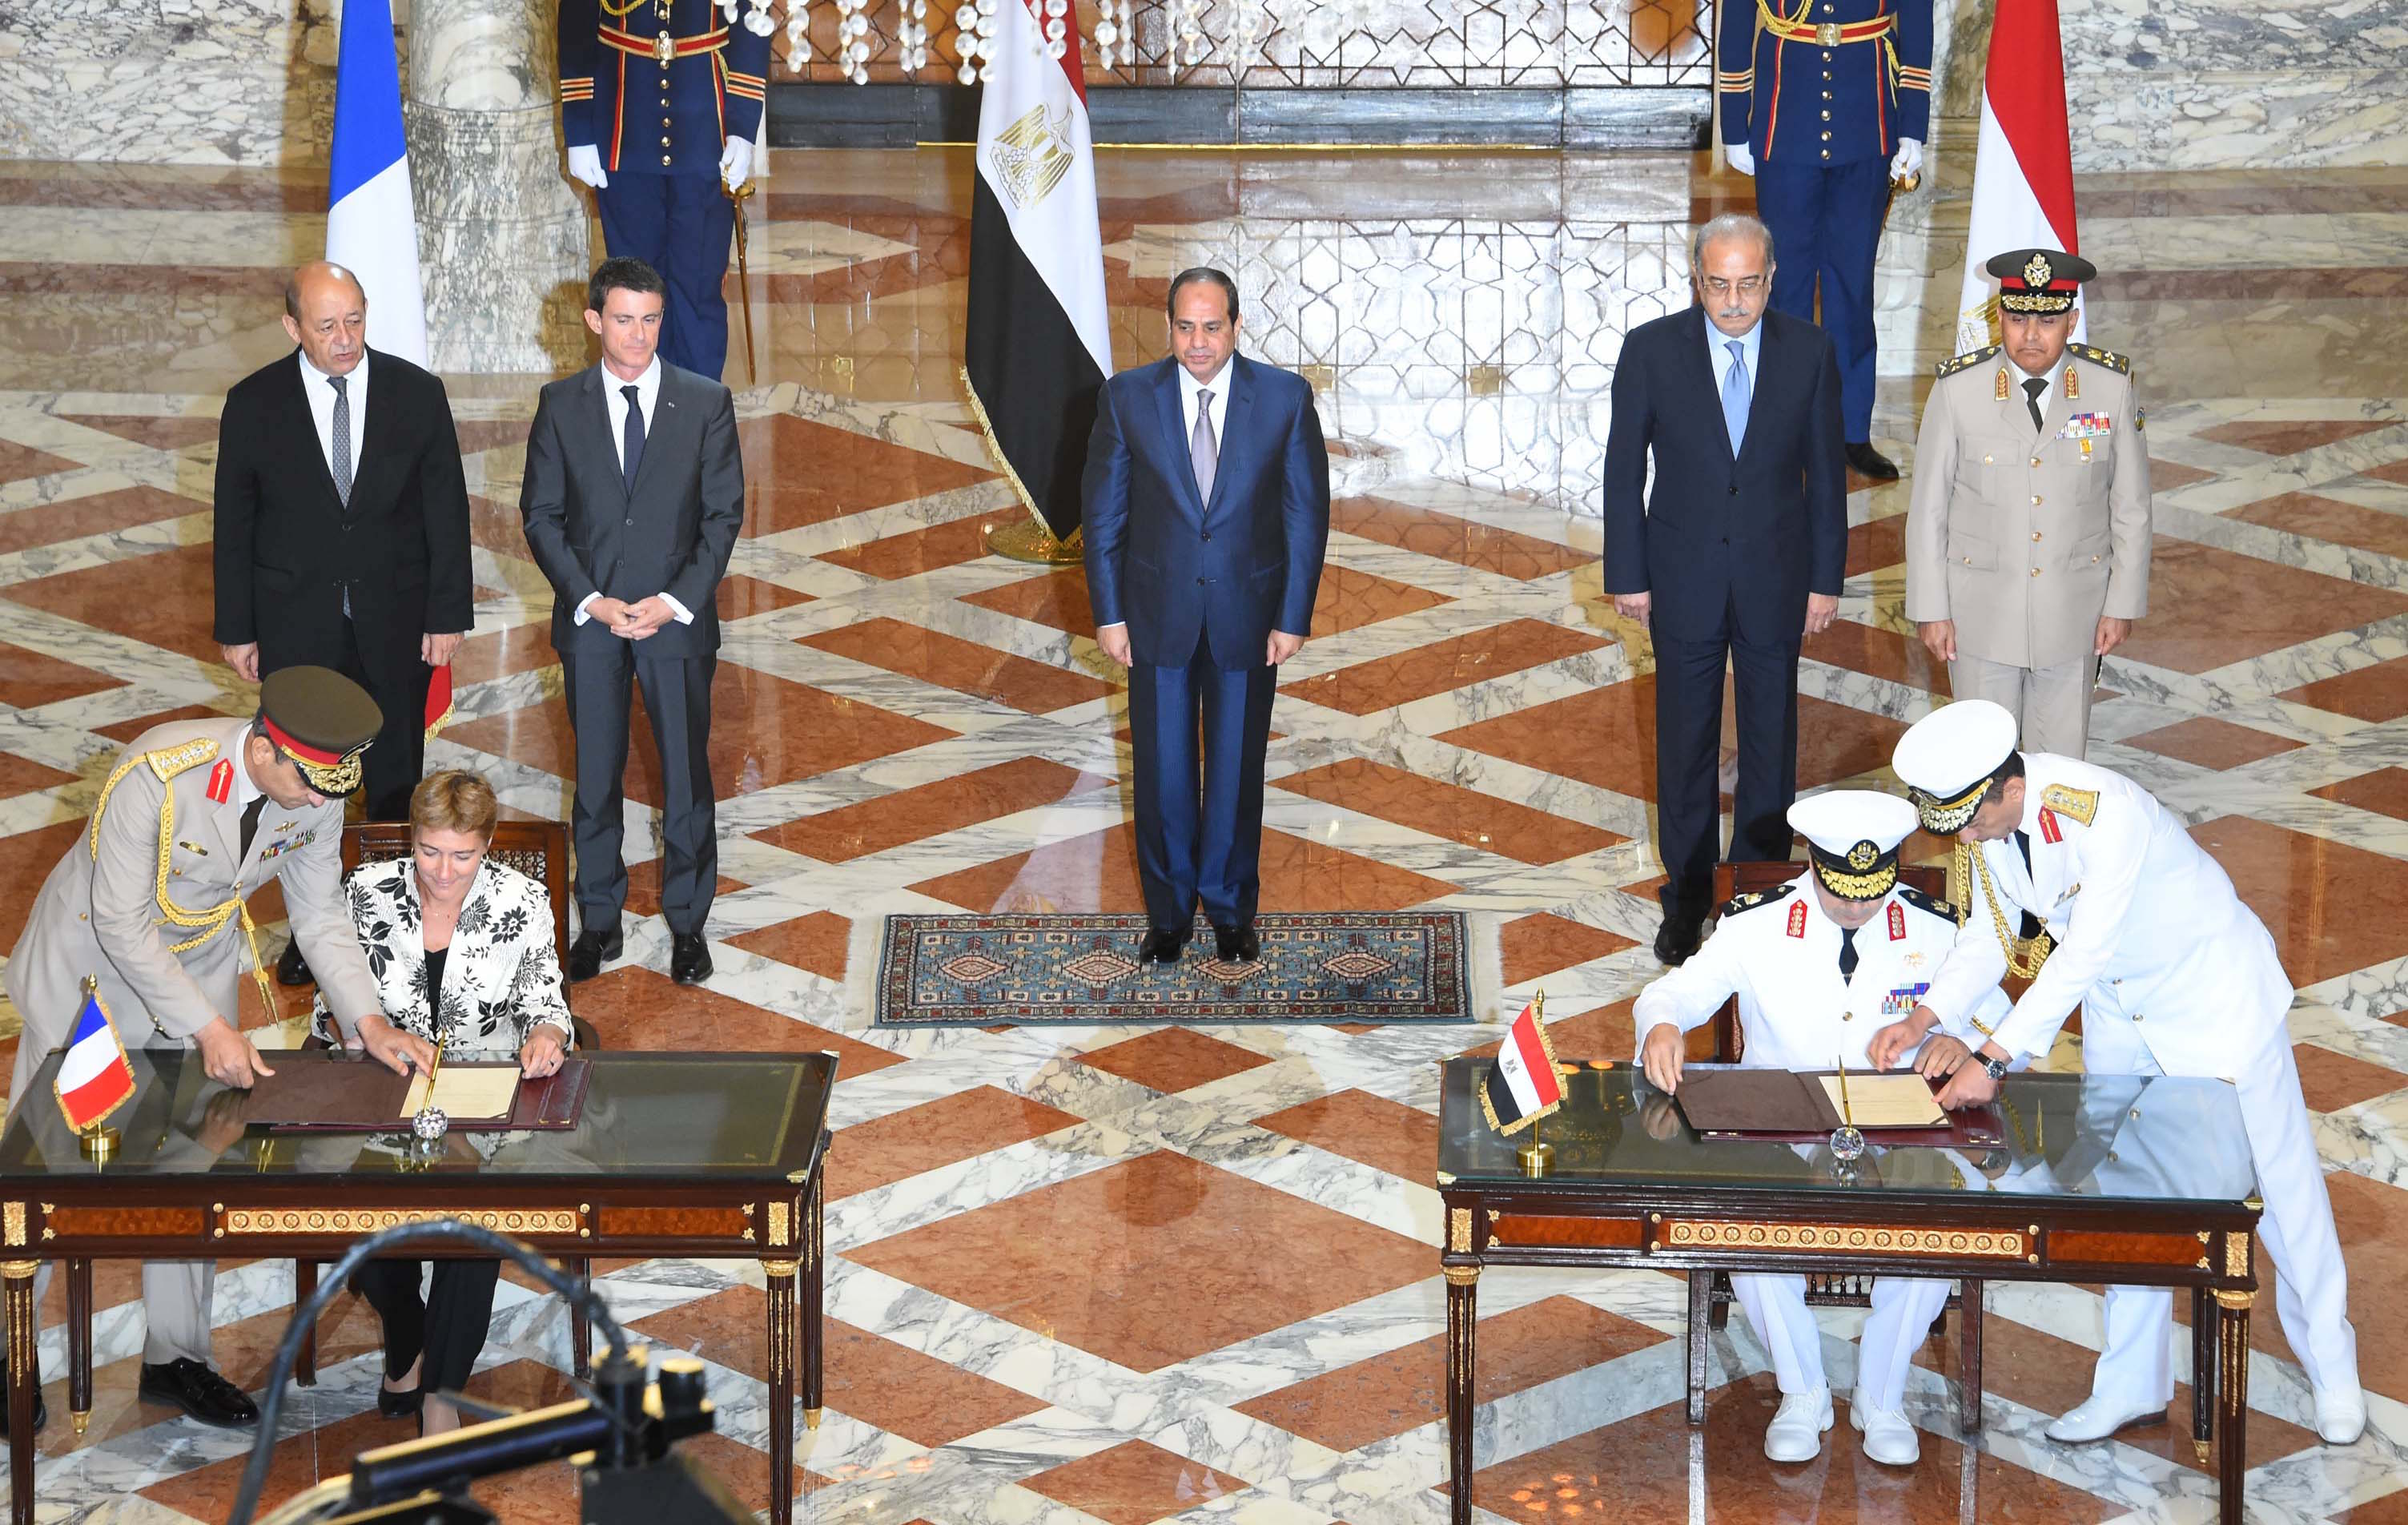 Egyptian President Abdel Fattah El-Sisi with the French and Egyptian Prime Ministers and Ministers of Defence at the deal-signing ceremony. PHOTO: Egypt's State Information Service